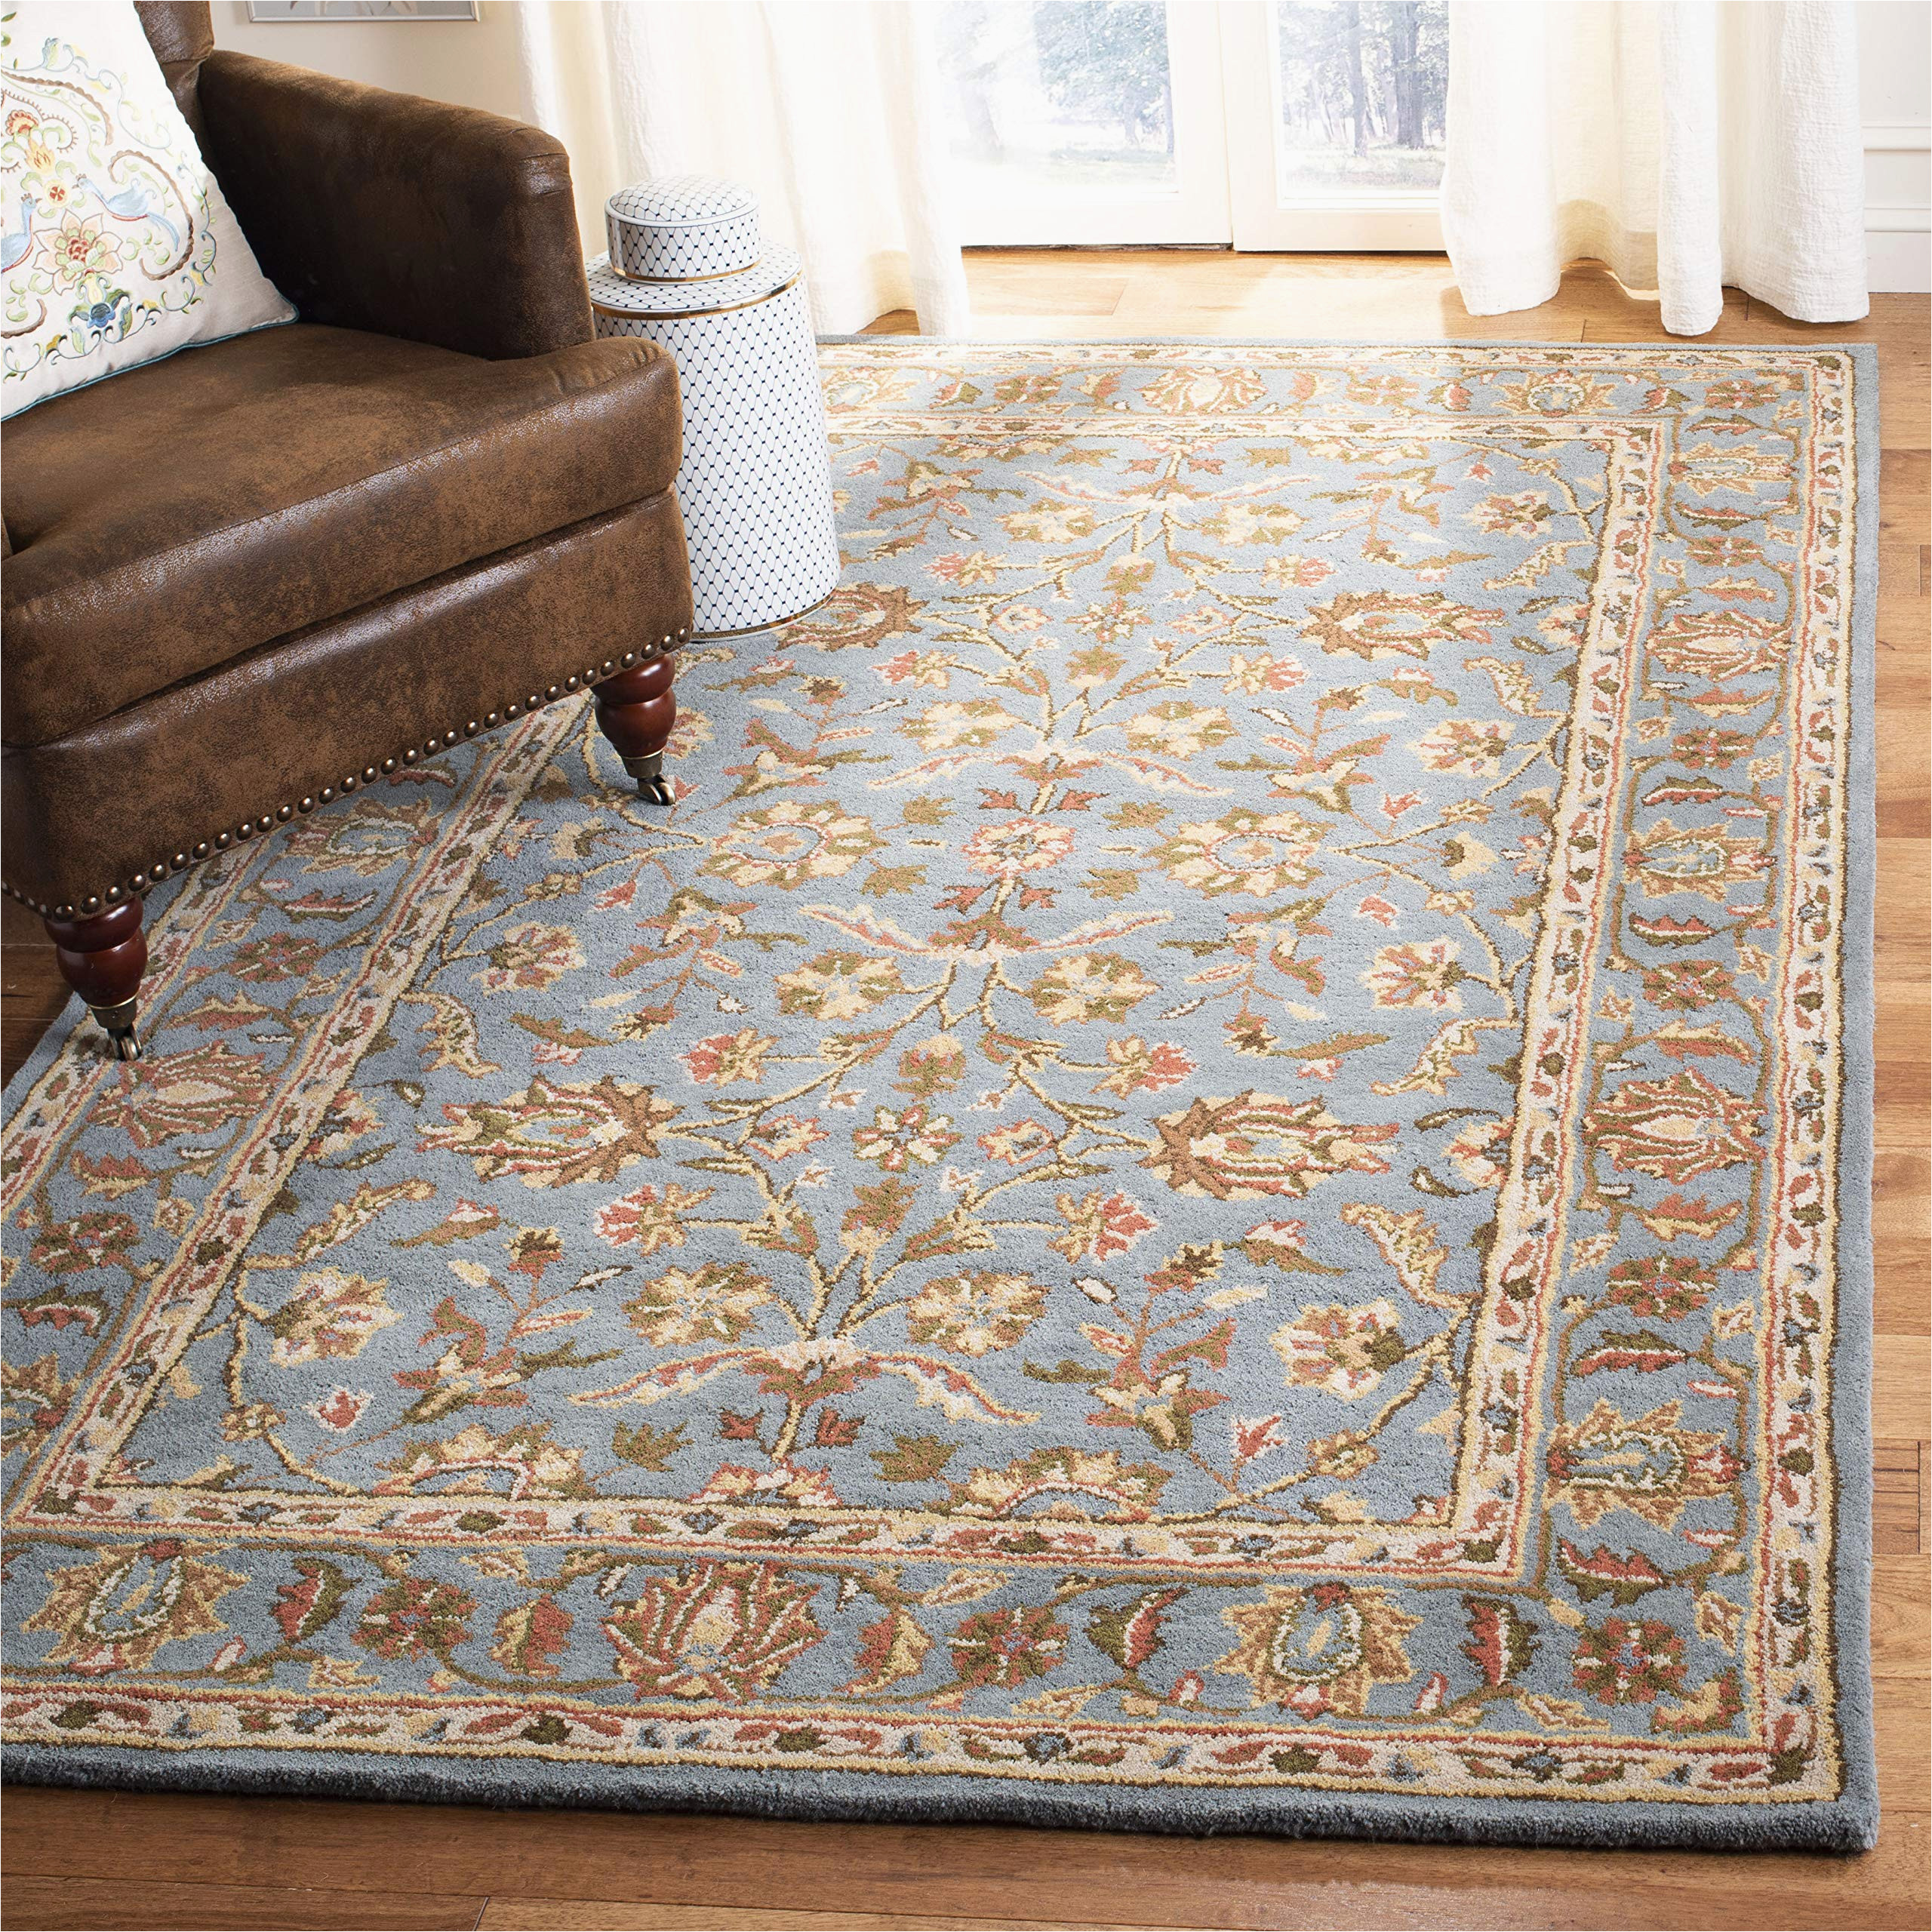 8×8 Blue area Rug Safavieh Heritage Collection 8′ X 8′ Square Blue / Blue Hg969a Handmade Traditional oriental Premium Wool area Rug